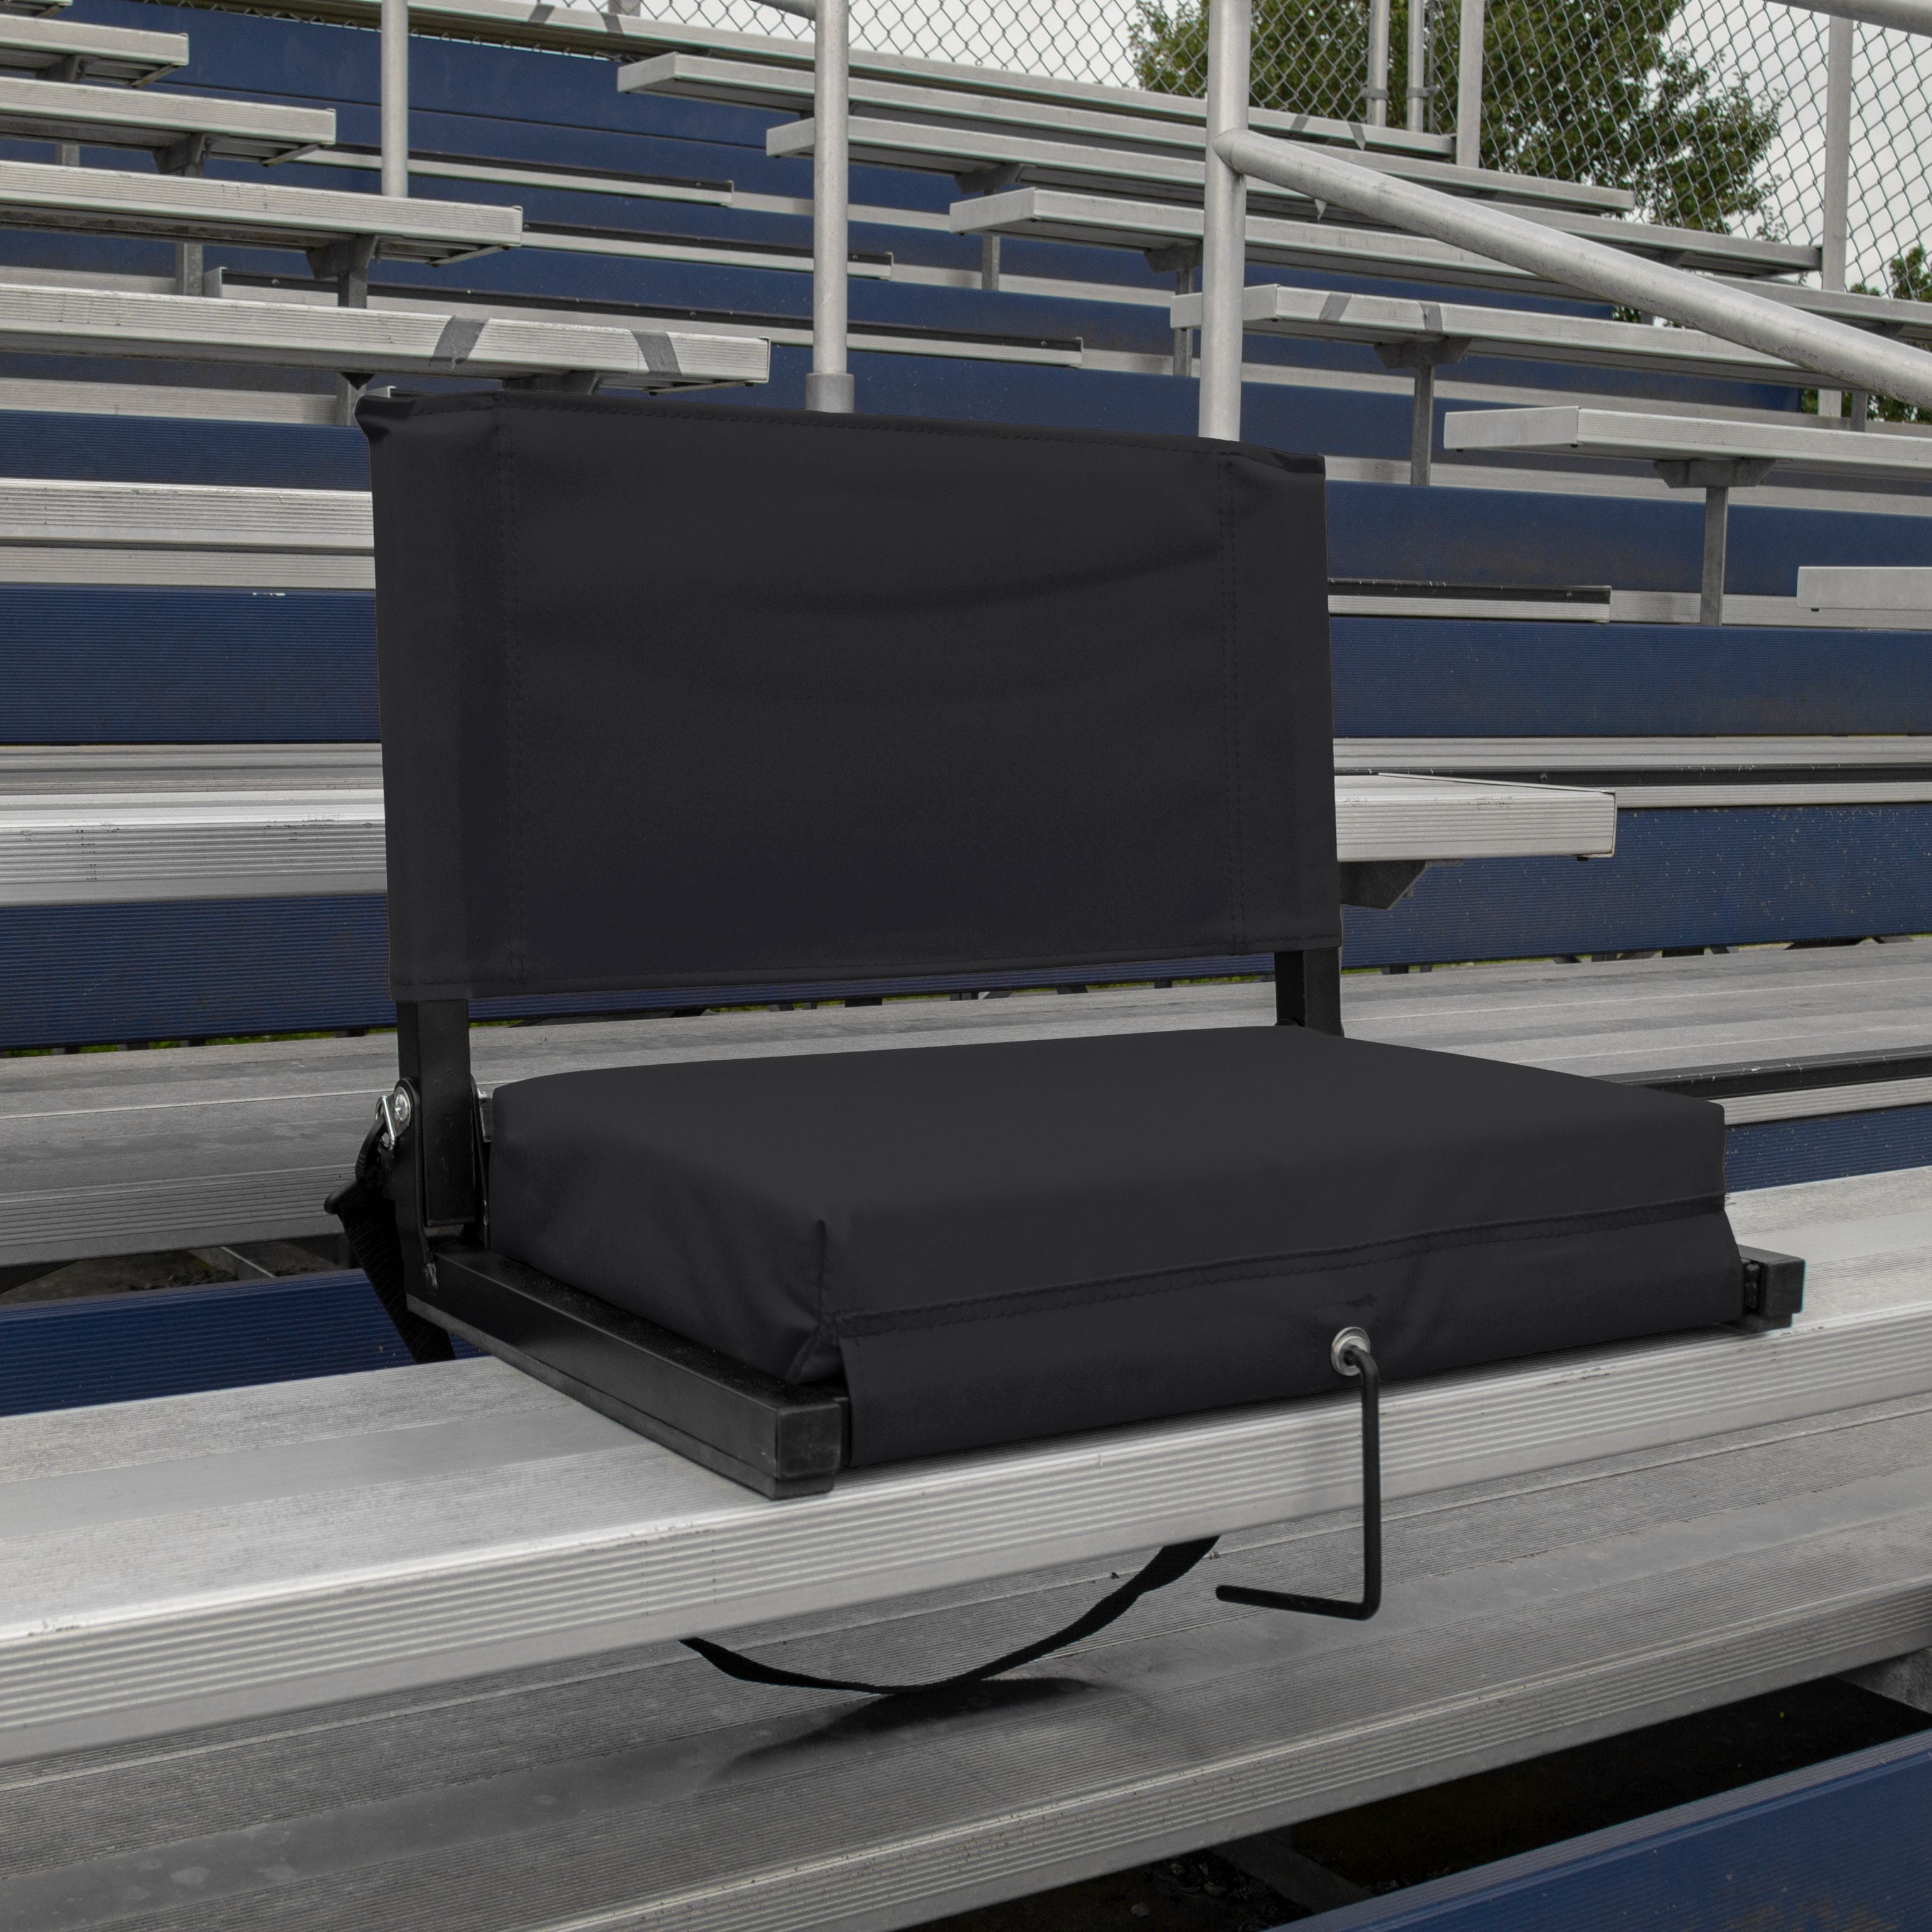 Latitude Run® Jaisigh Benches Portable Reclining Stadium Seats, Stadium  Chair with Padded Cushion and Armrest Support, Stadium Seats for Bleachers  with Back Support & Reviews